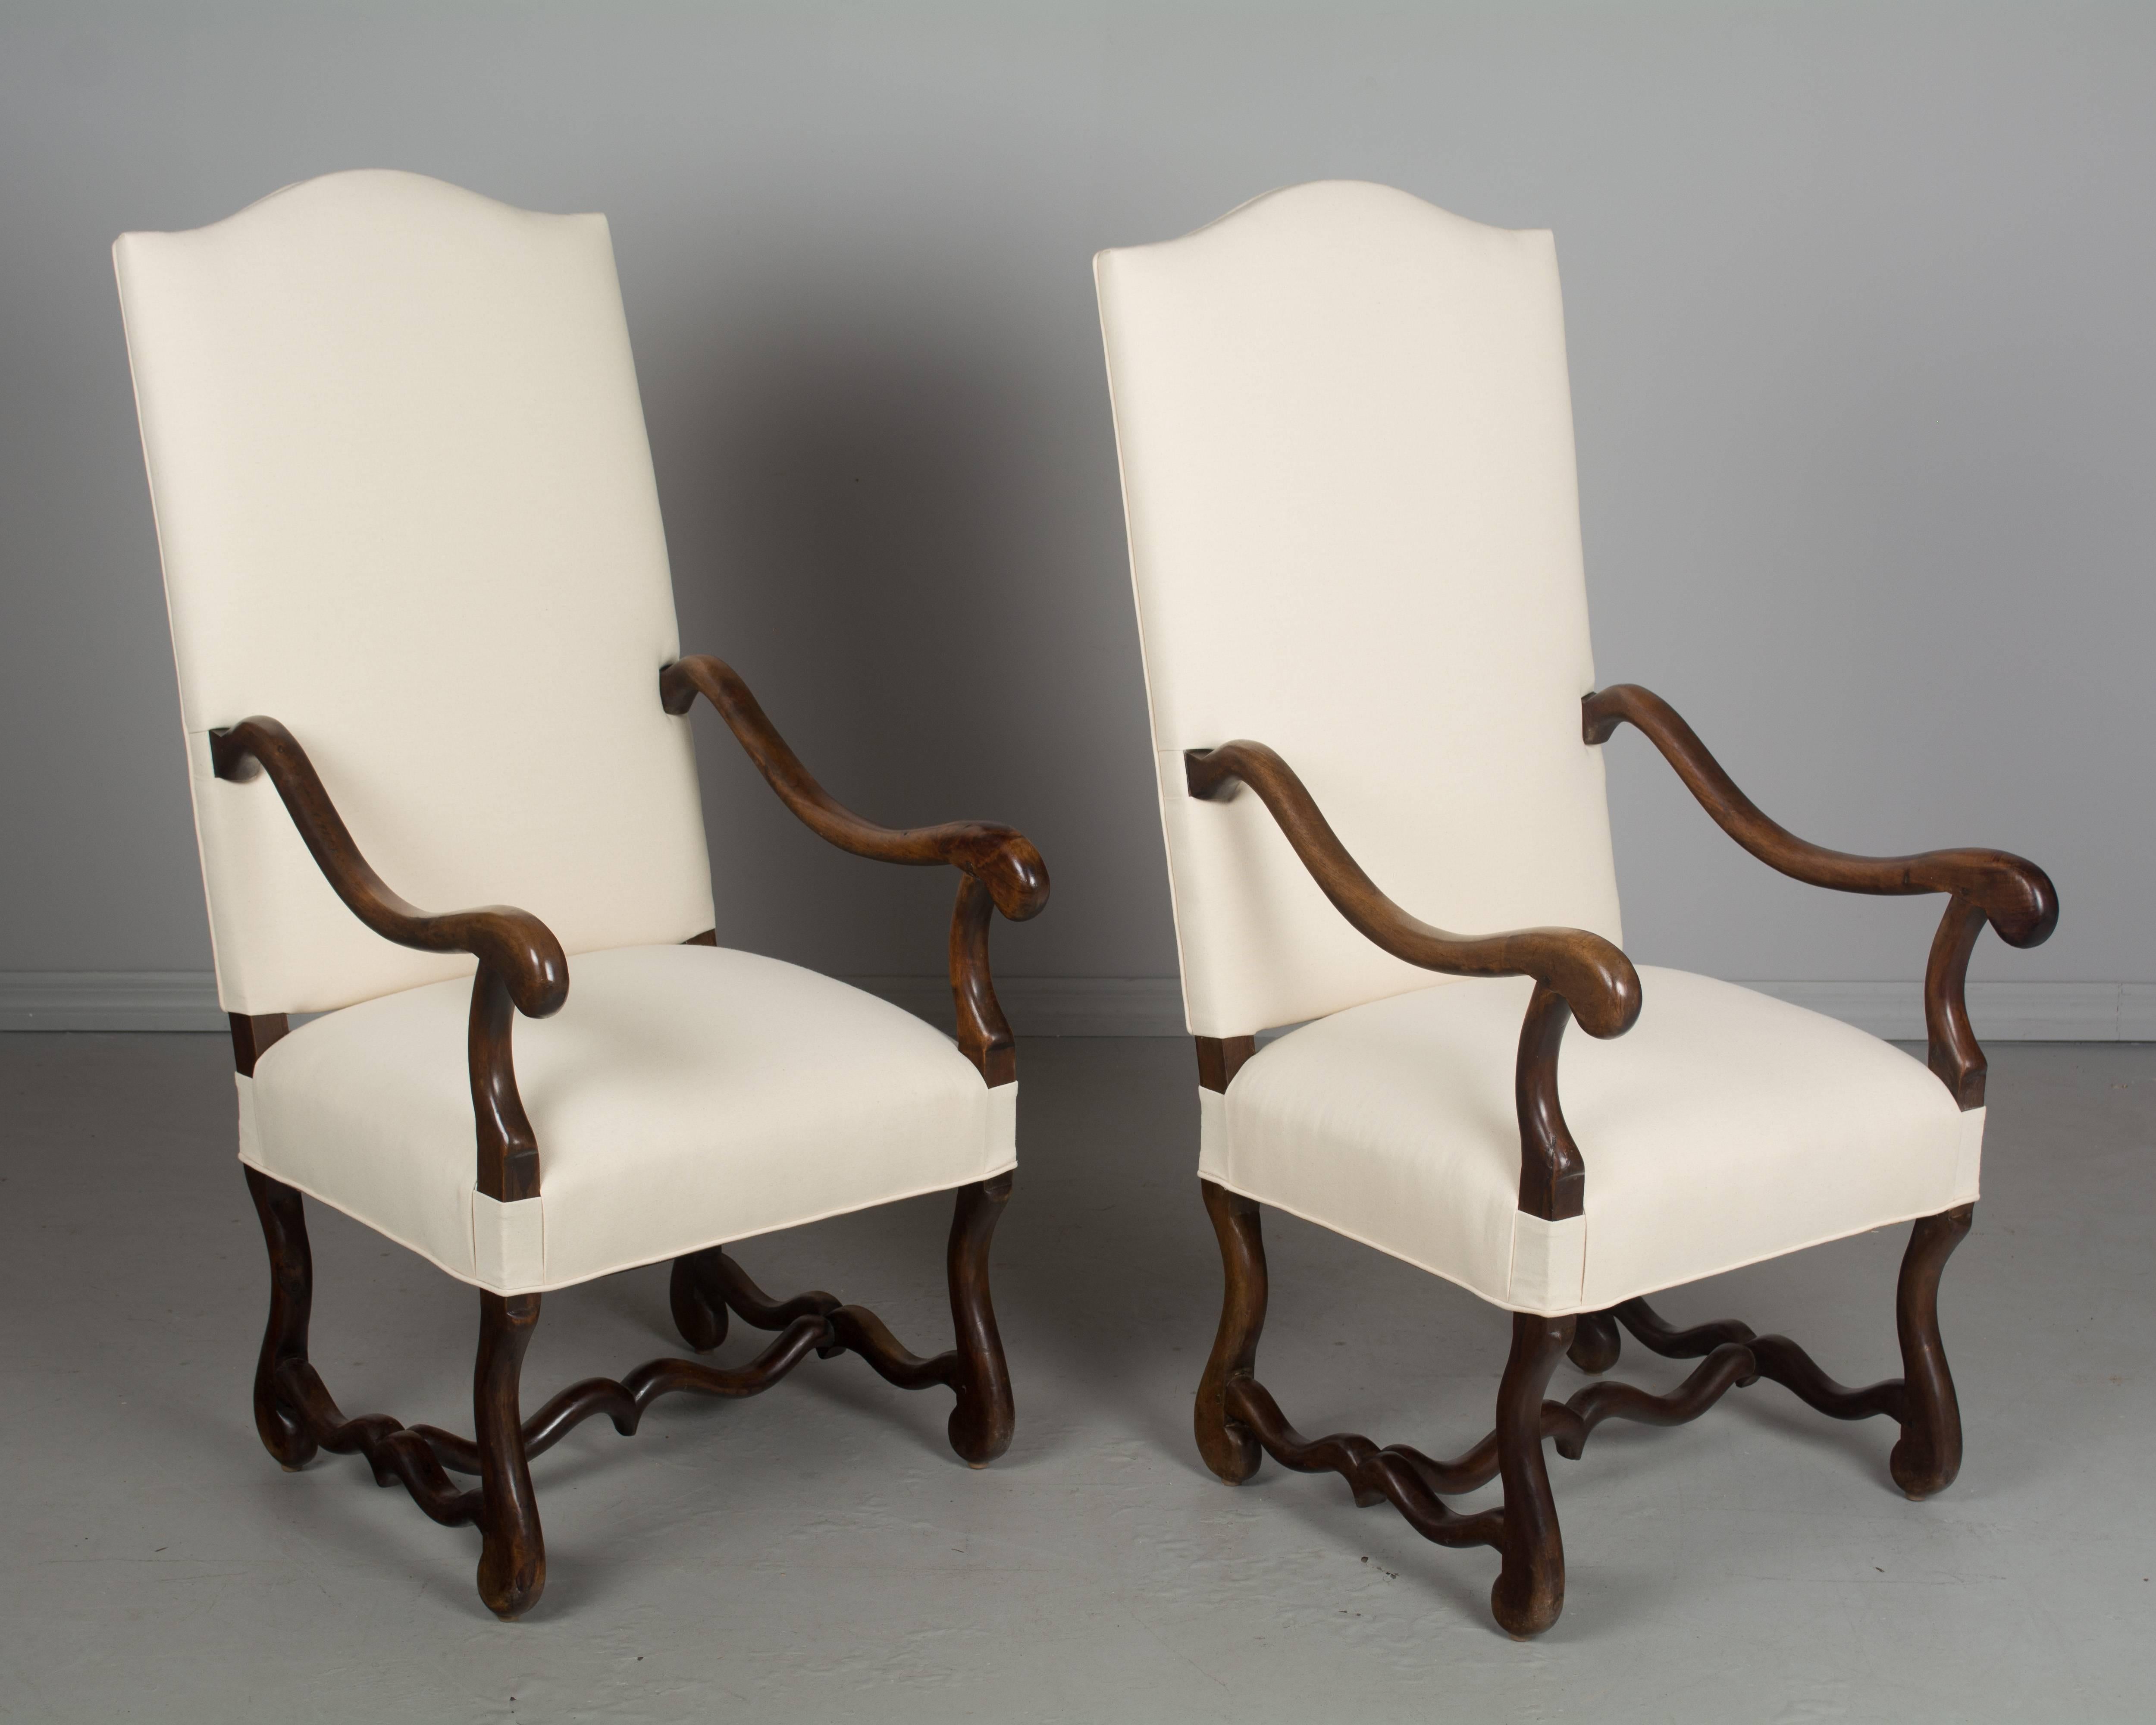 A pair of 19th Century Os de Mouton style fauteuils, or arm chairs, made of walnut. Comfortable seating with sturdy frames and pegged construction. Newly upholstered.